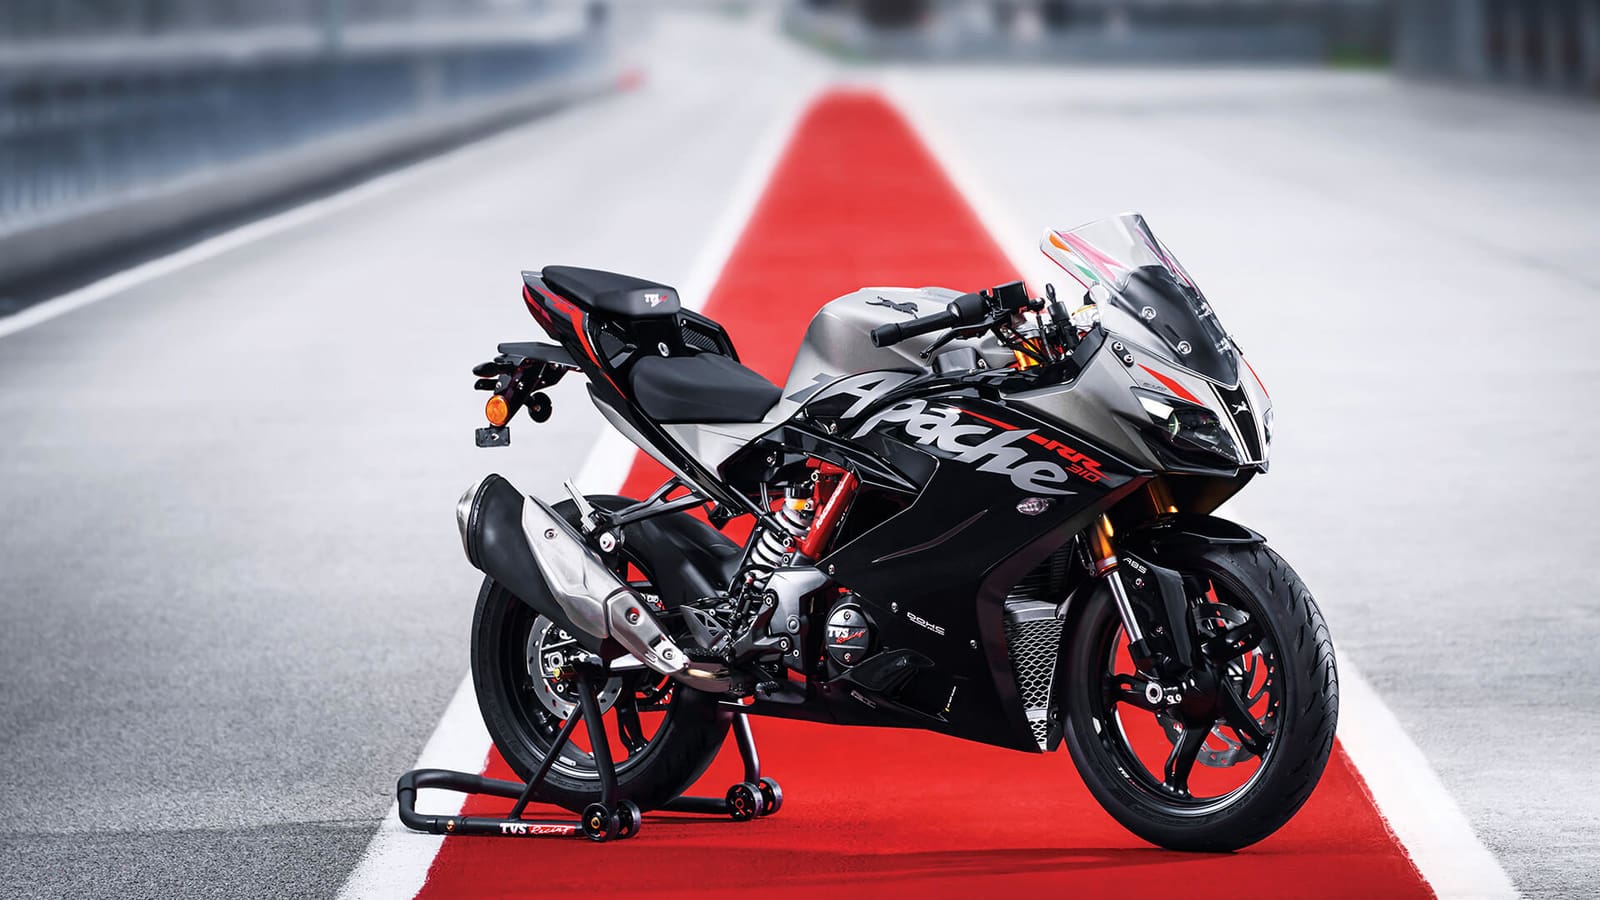 OVERDRIVE on Twitter Take the best look yet at the new TVSMotor Apache  RR 310 Full res images Zoom in TVSApacheRR310 PureRacecraft  ApacheRR310 httpstcoqznsbZN7gb  Twitter